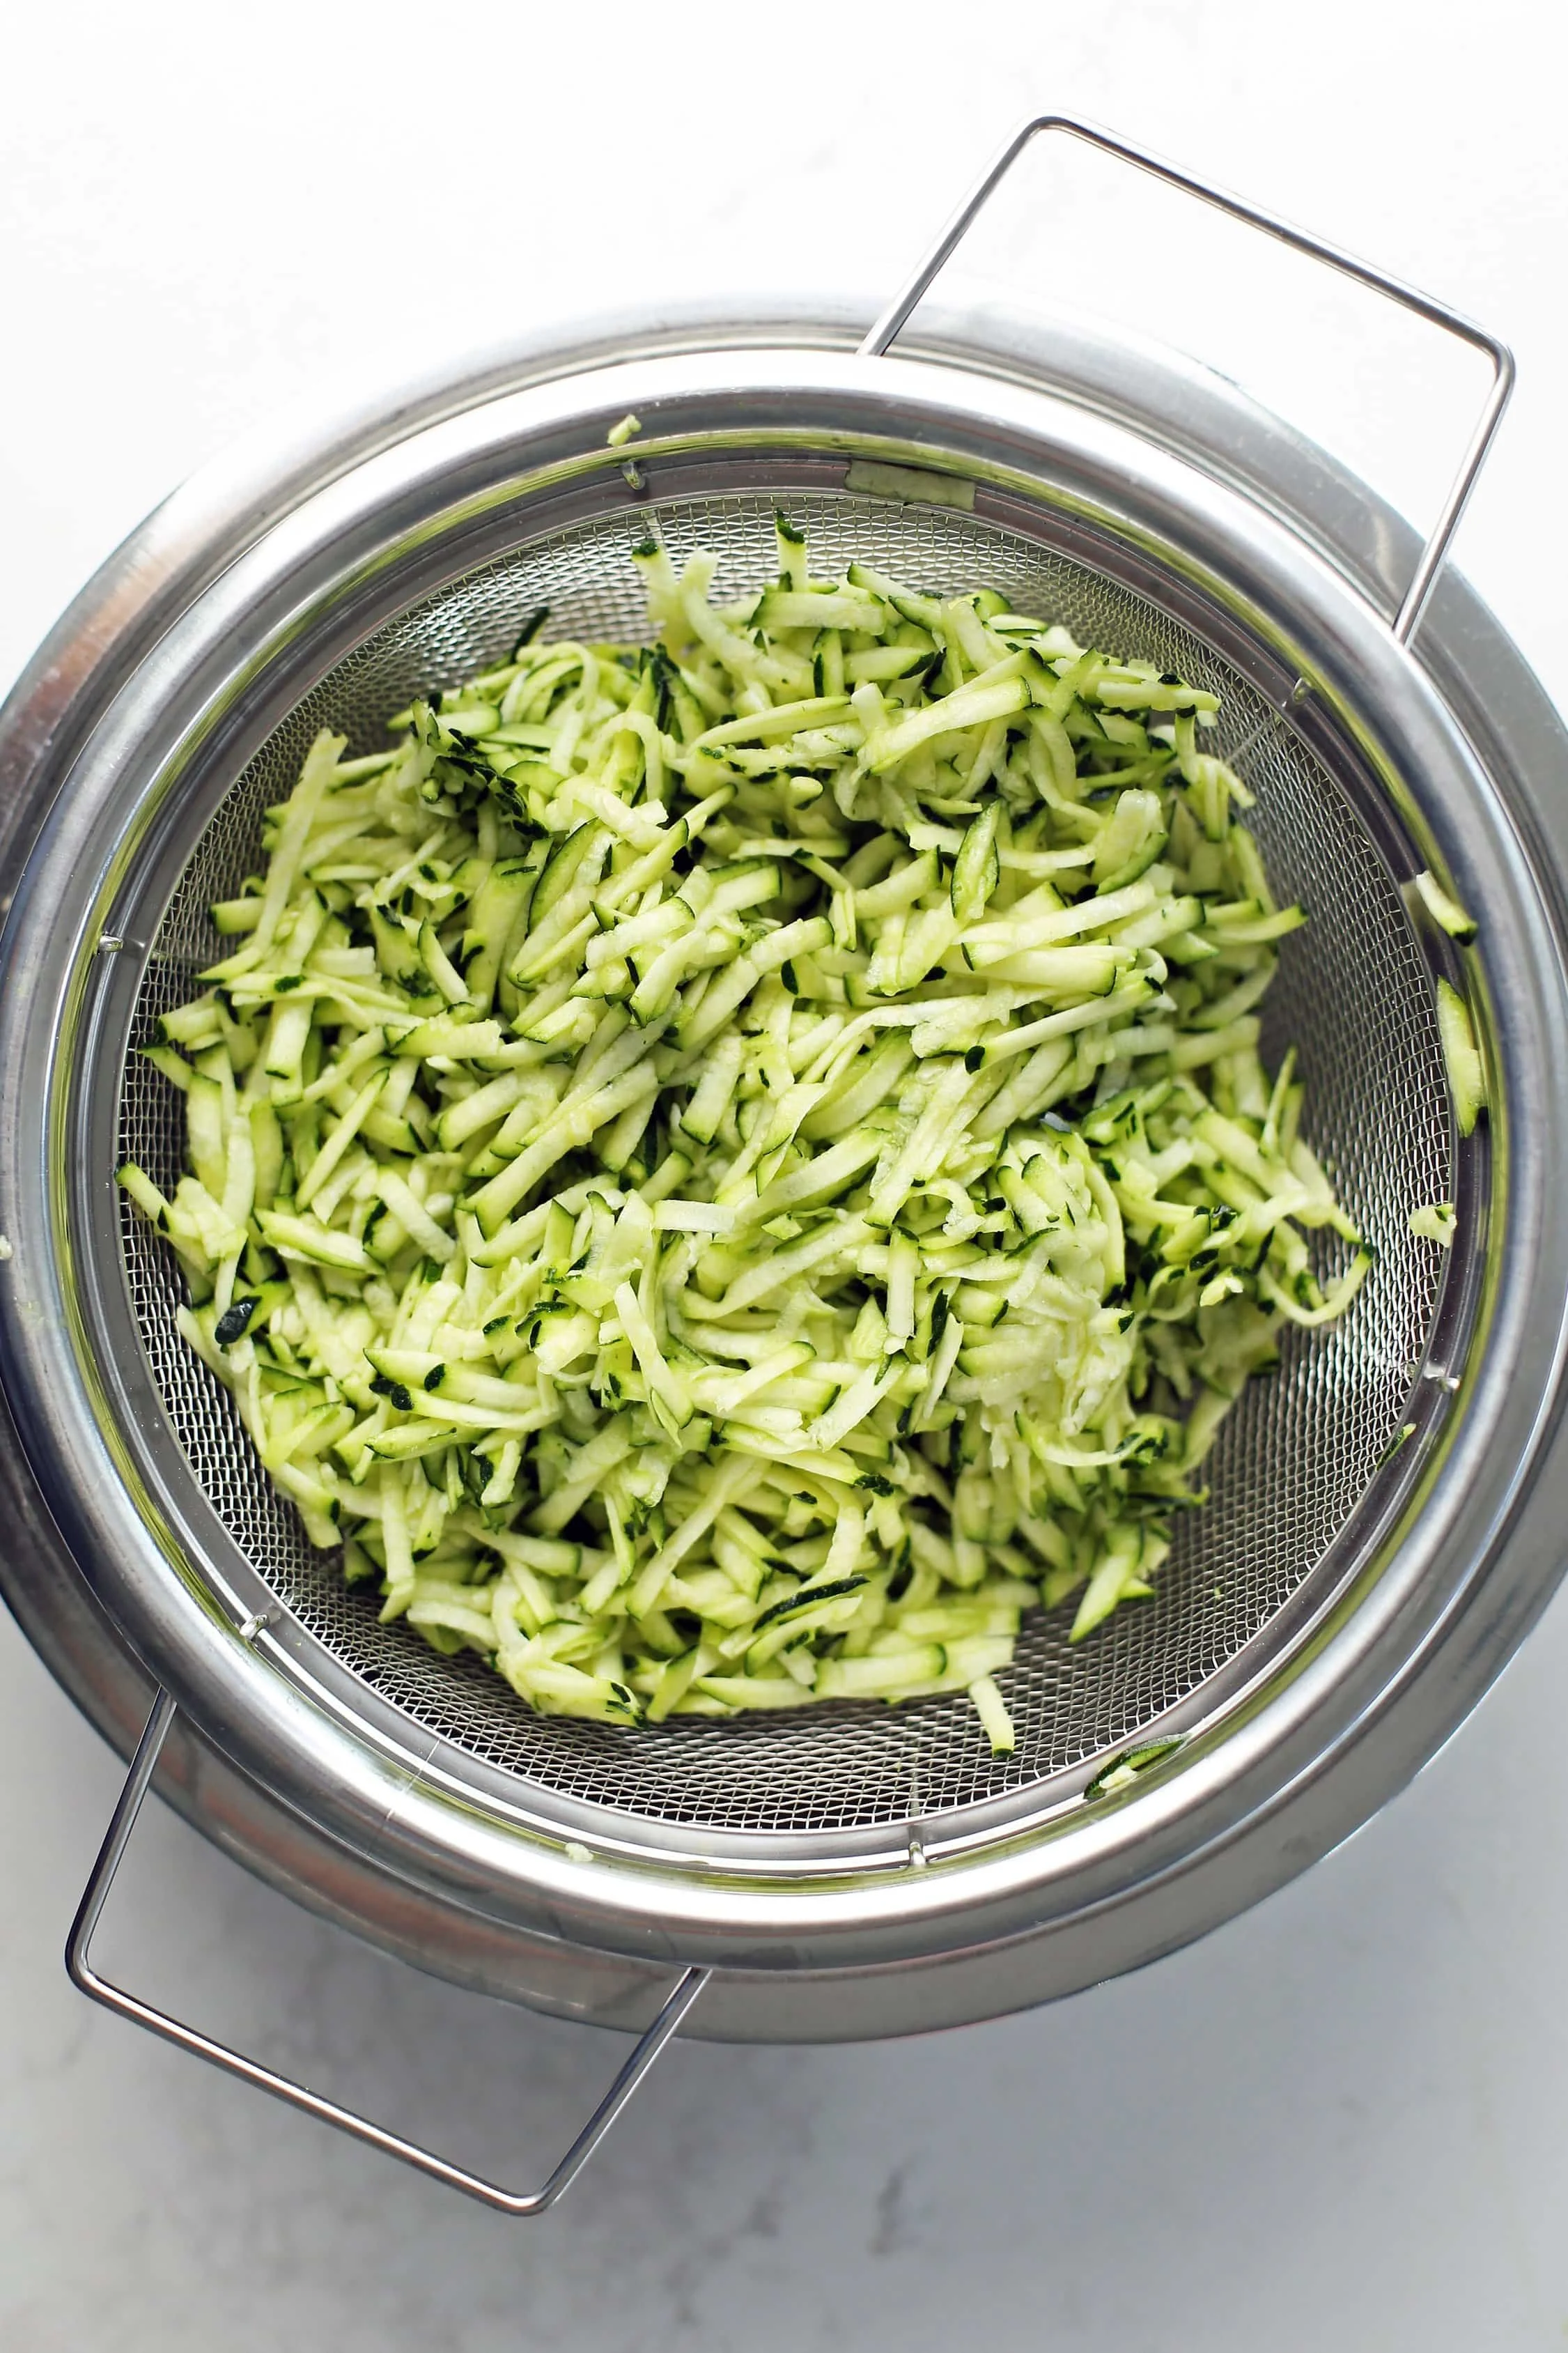 Grated zucchini in a metal mesh strainer with a stainless steel bowl placed below it.